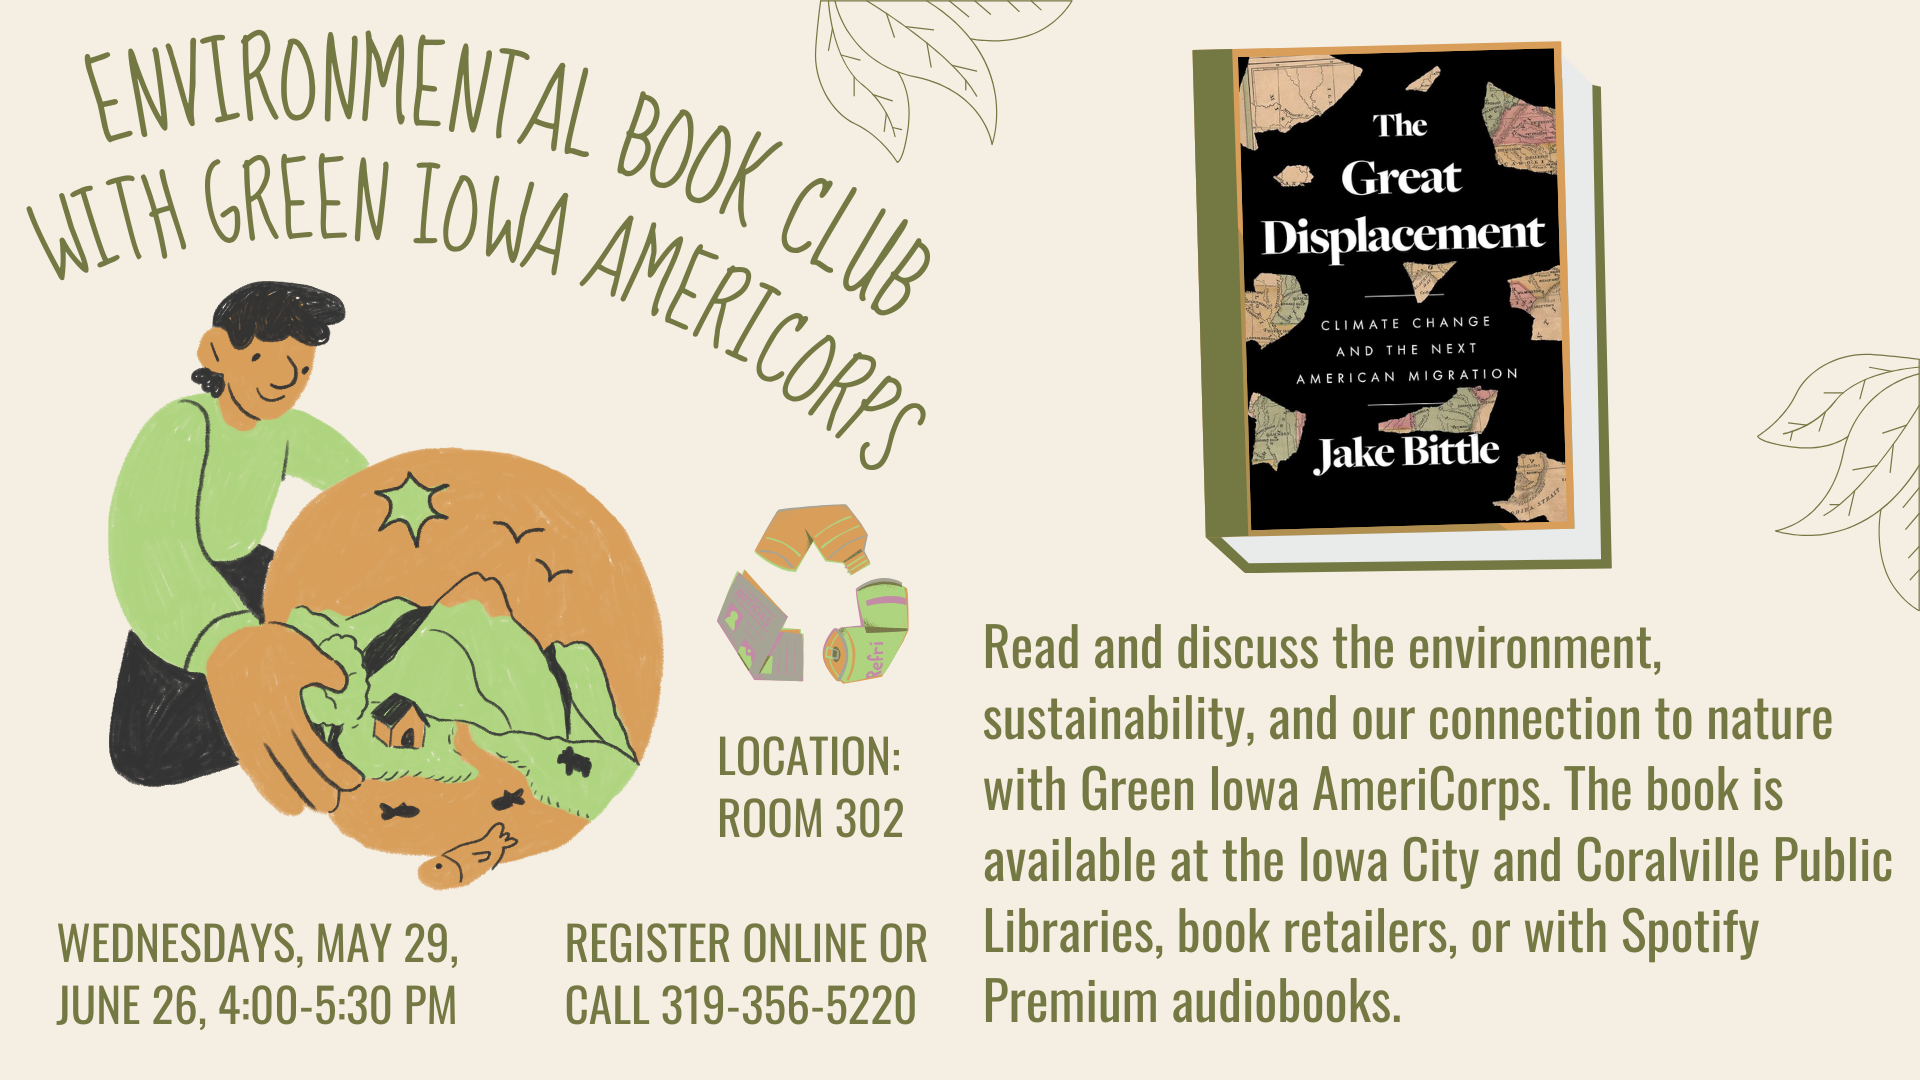 Green Iowa Environmental Book Club - The Great Displacement